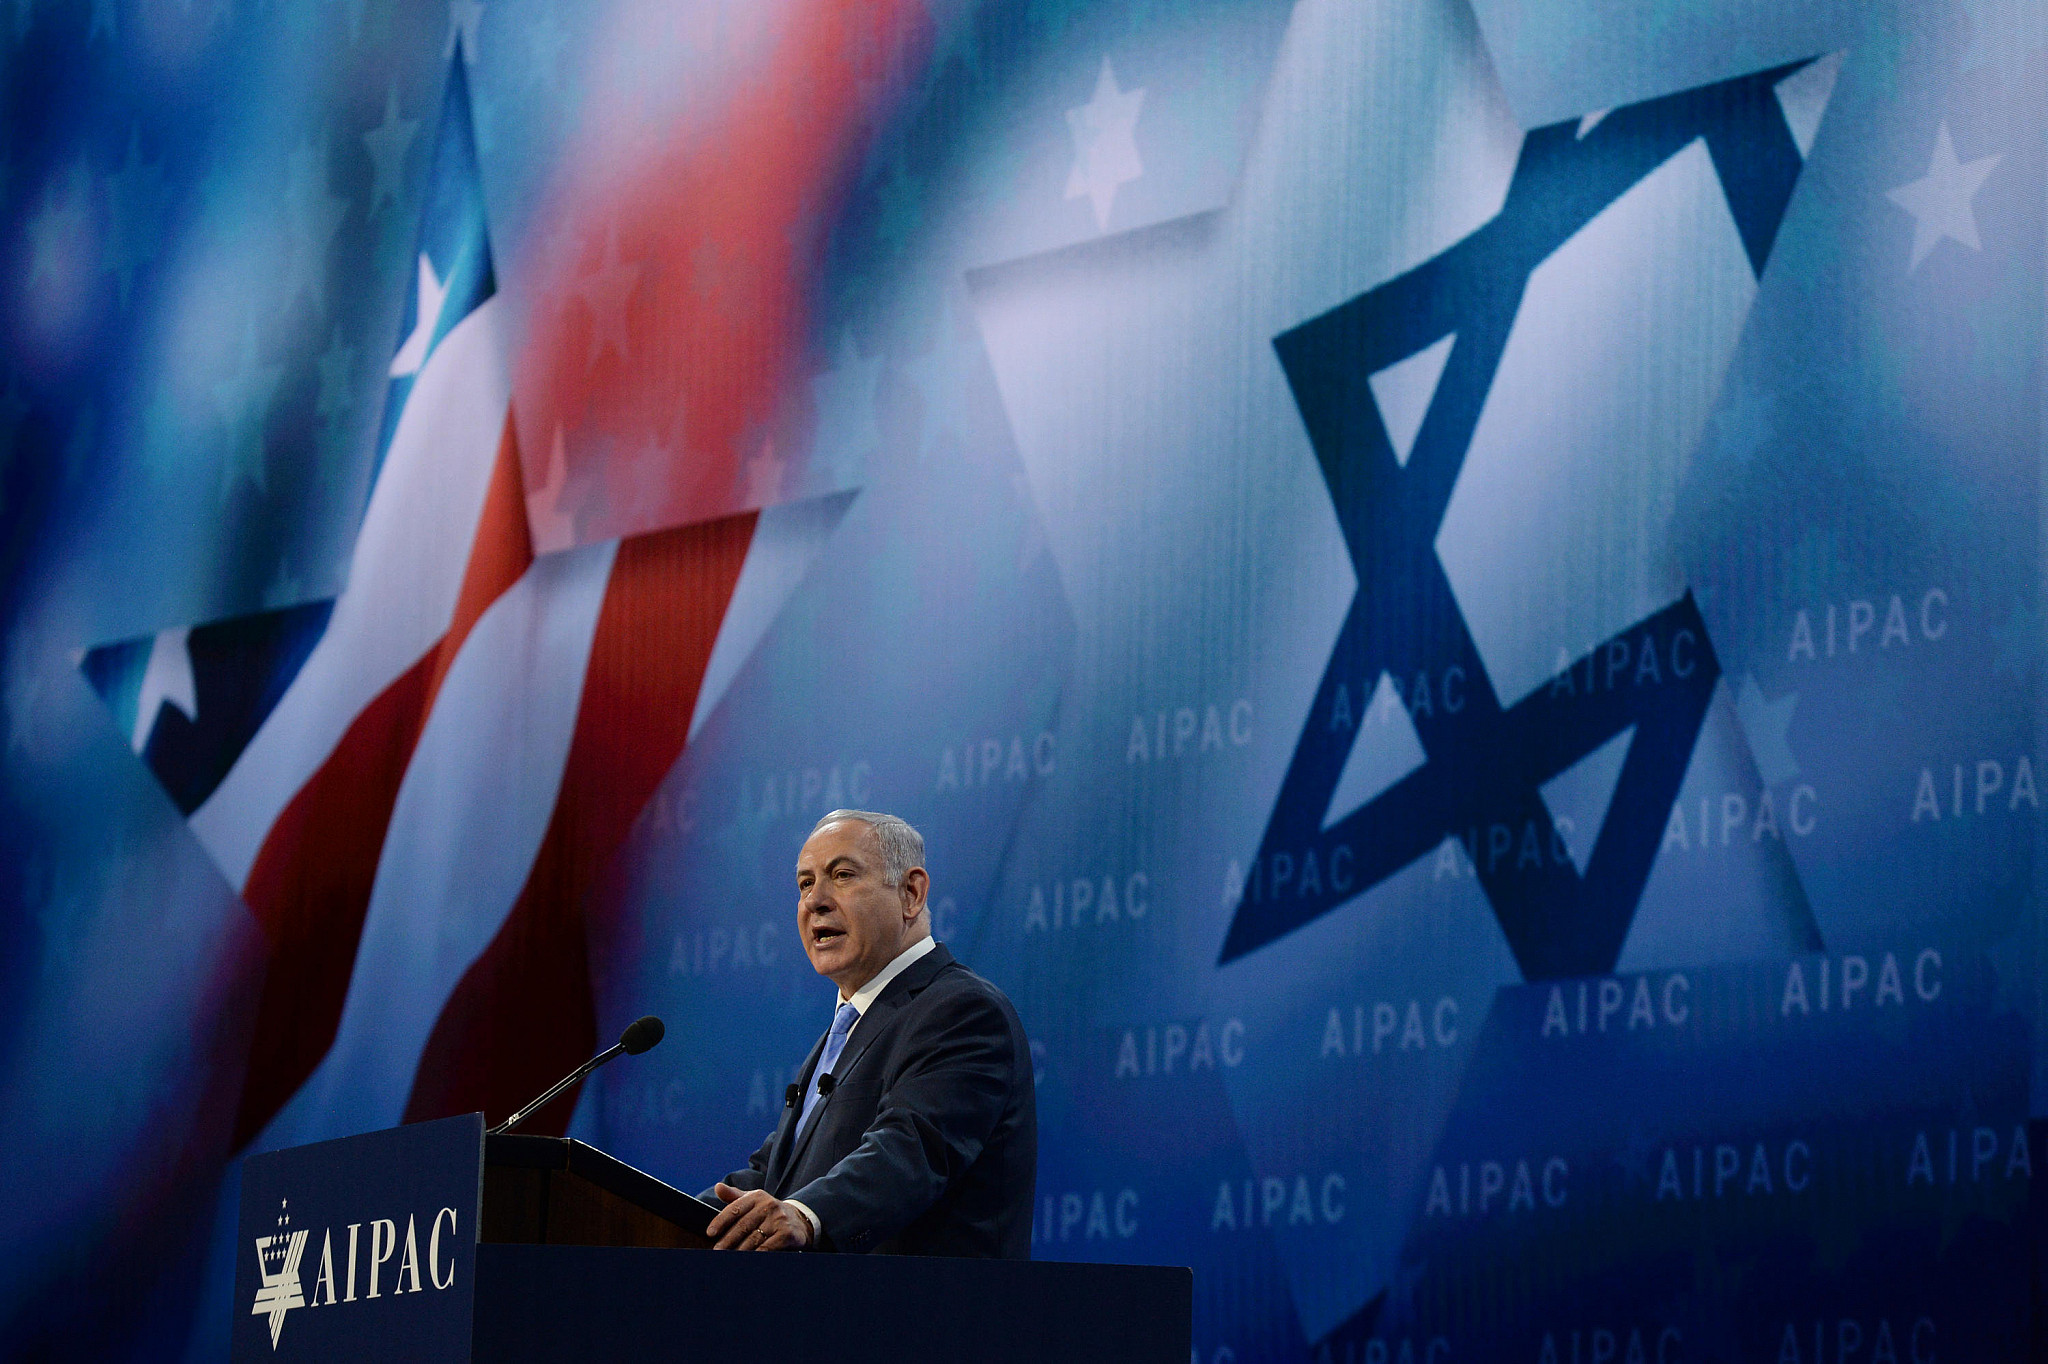 Prime Minister Benjamin Netanyahu speaks at the AIPAC Conference in Washington, D.C. on March 6, 2018. (Haim Zach/GPO)